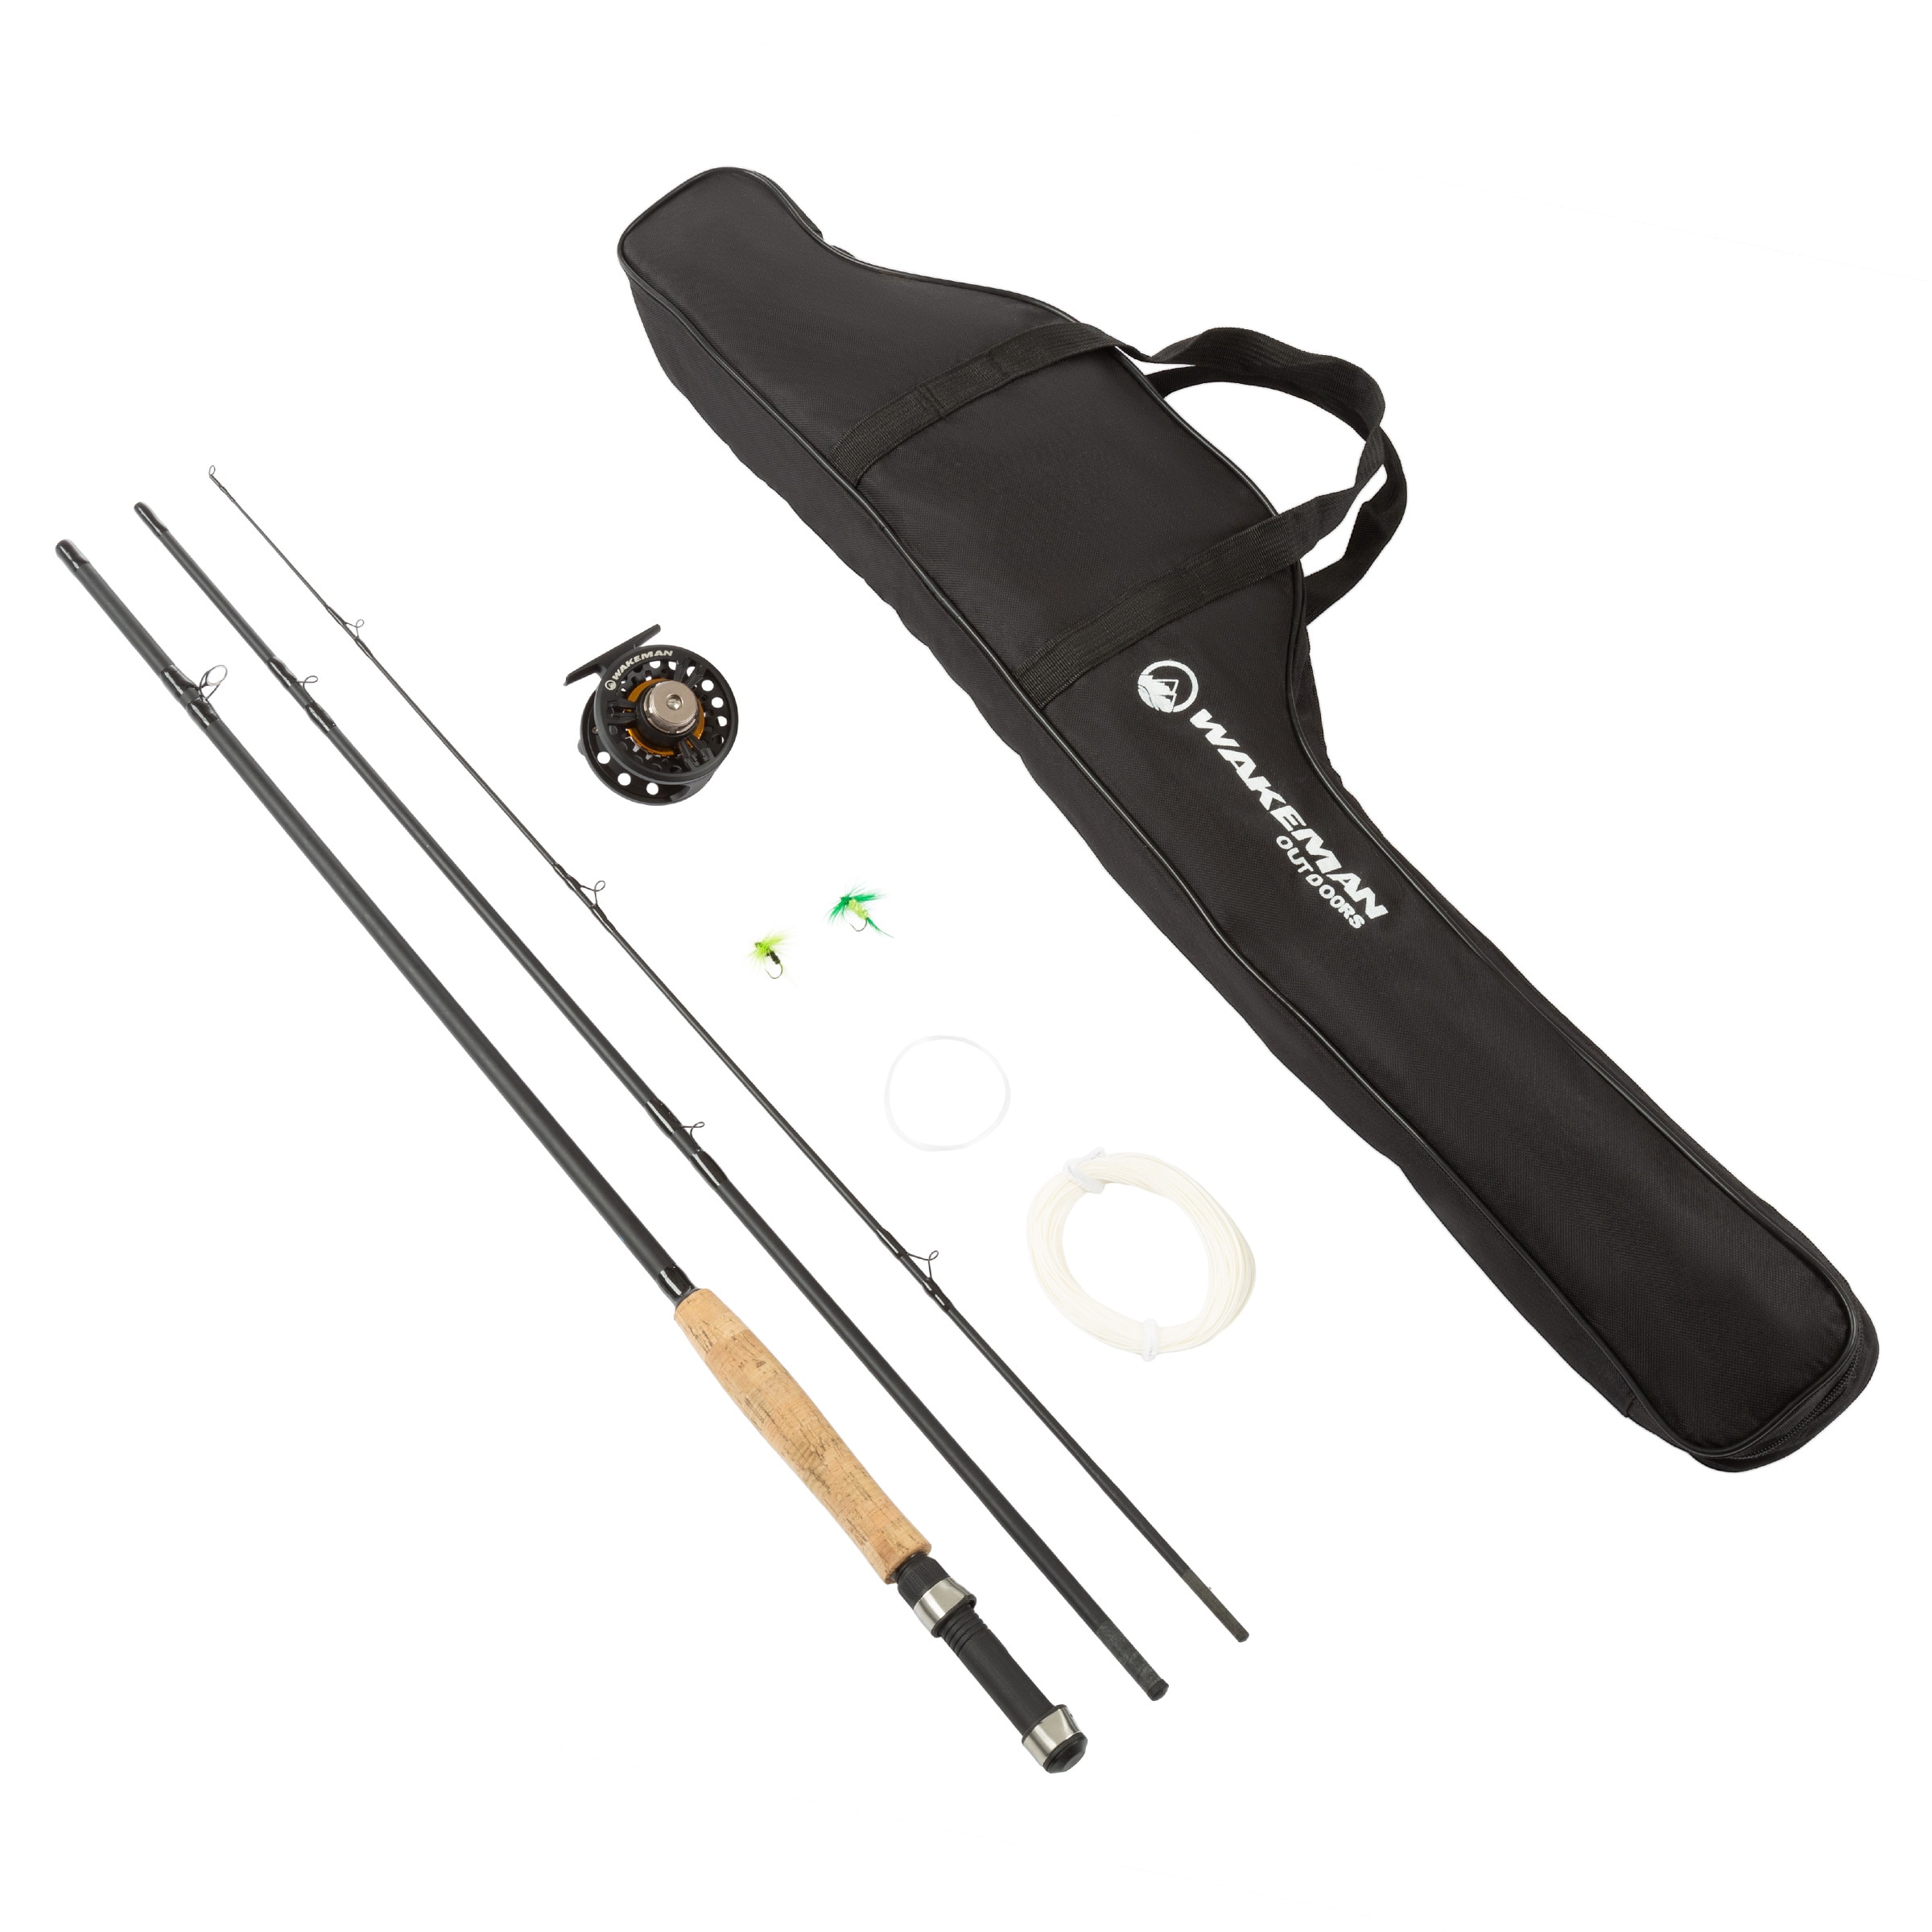  Rod & Reel Combos - Fishing: Sports & Outdoors